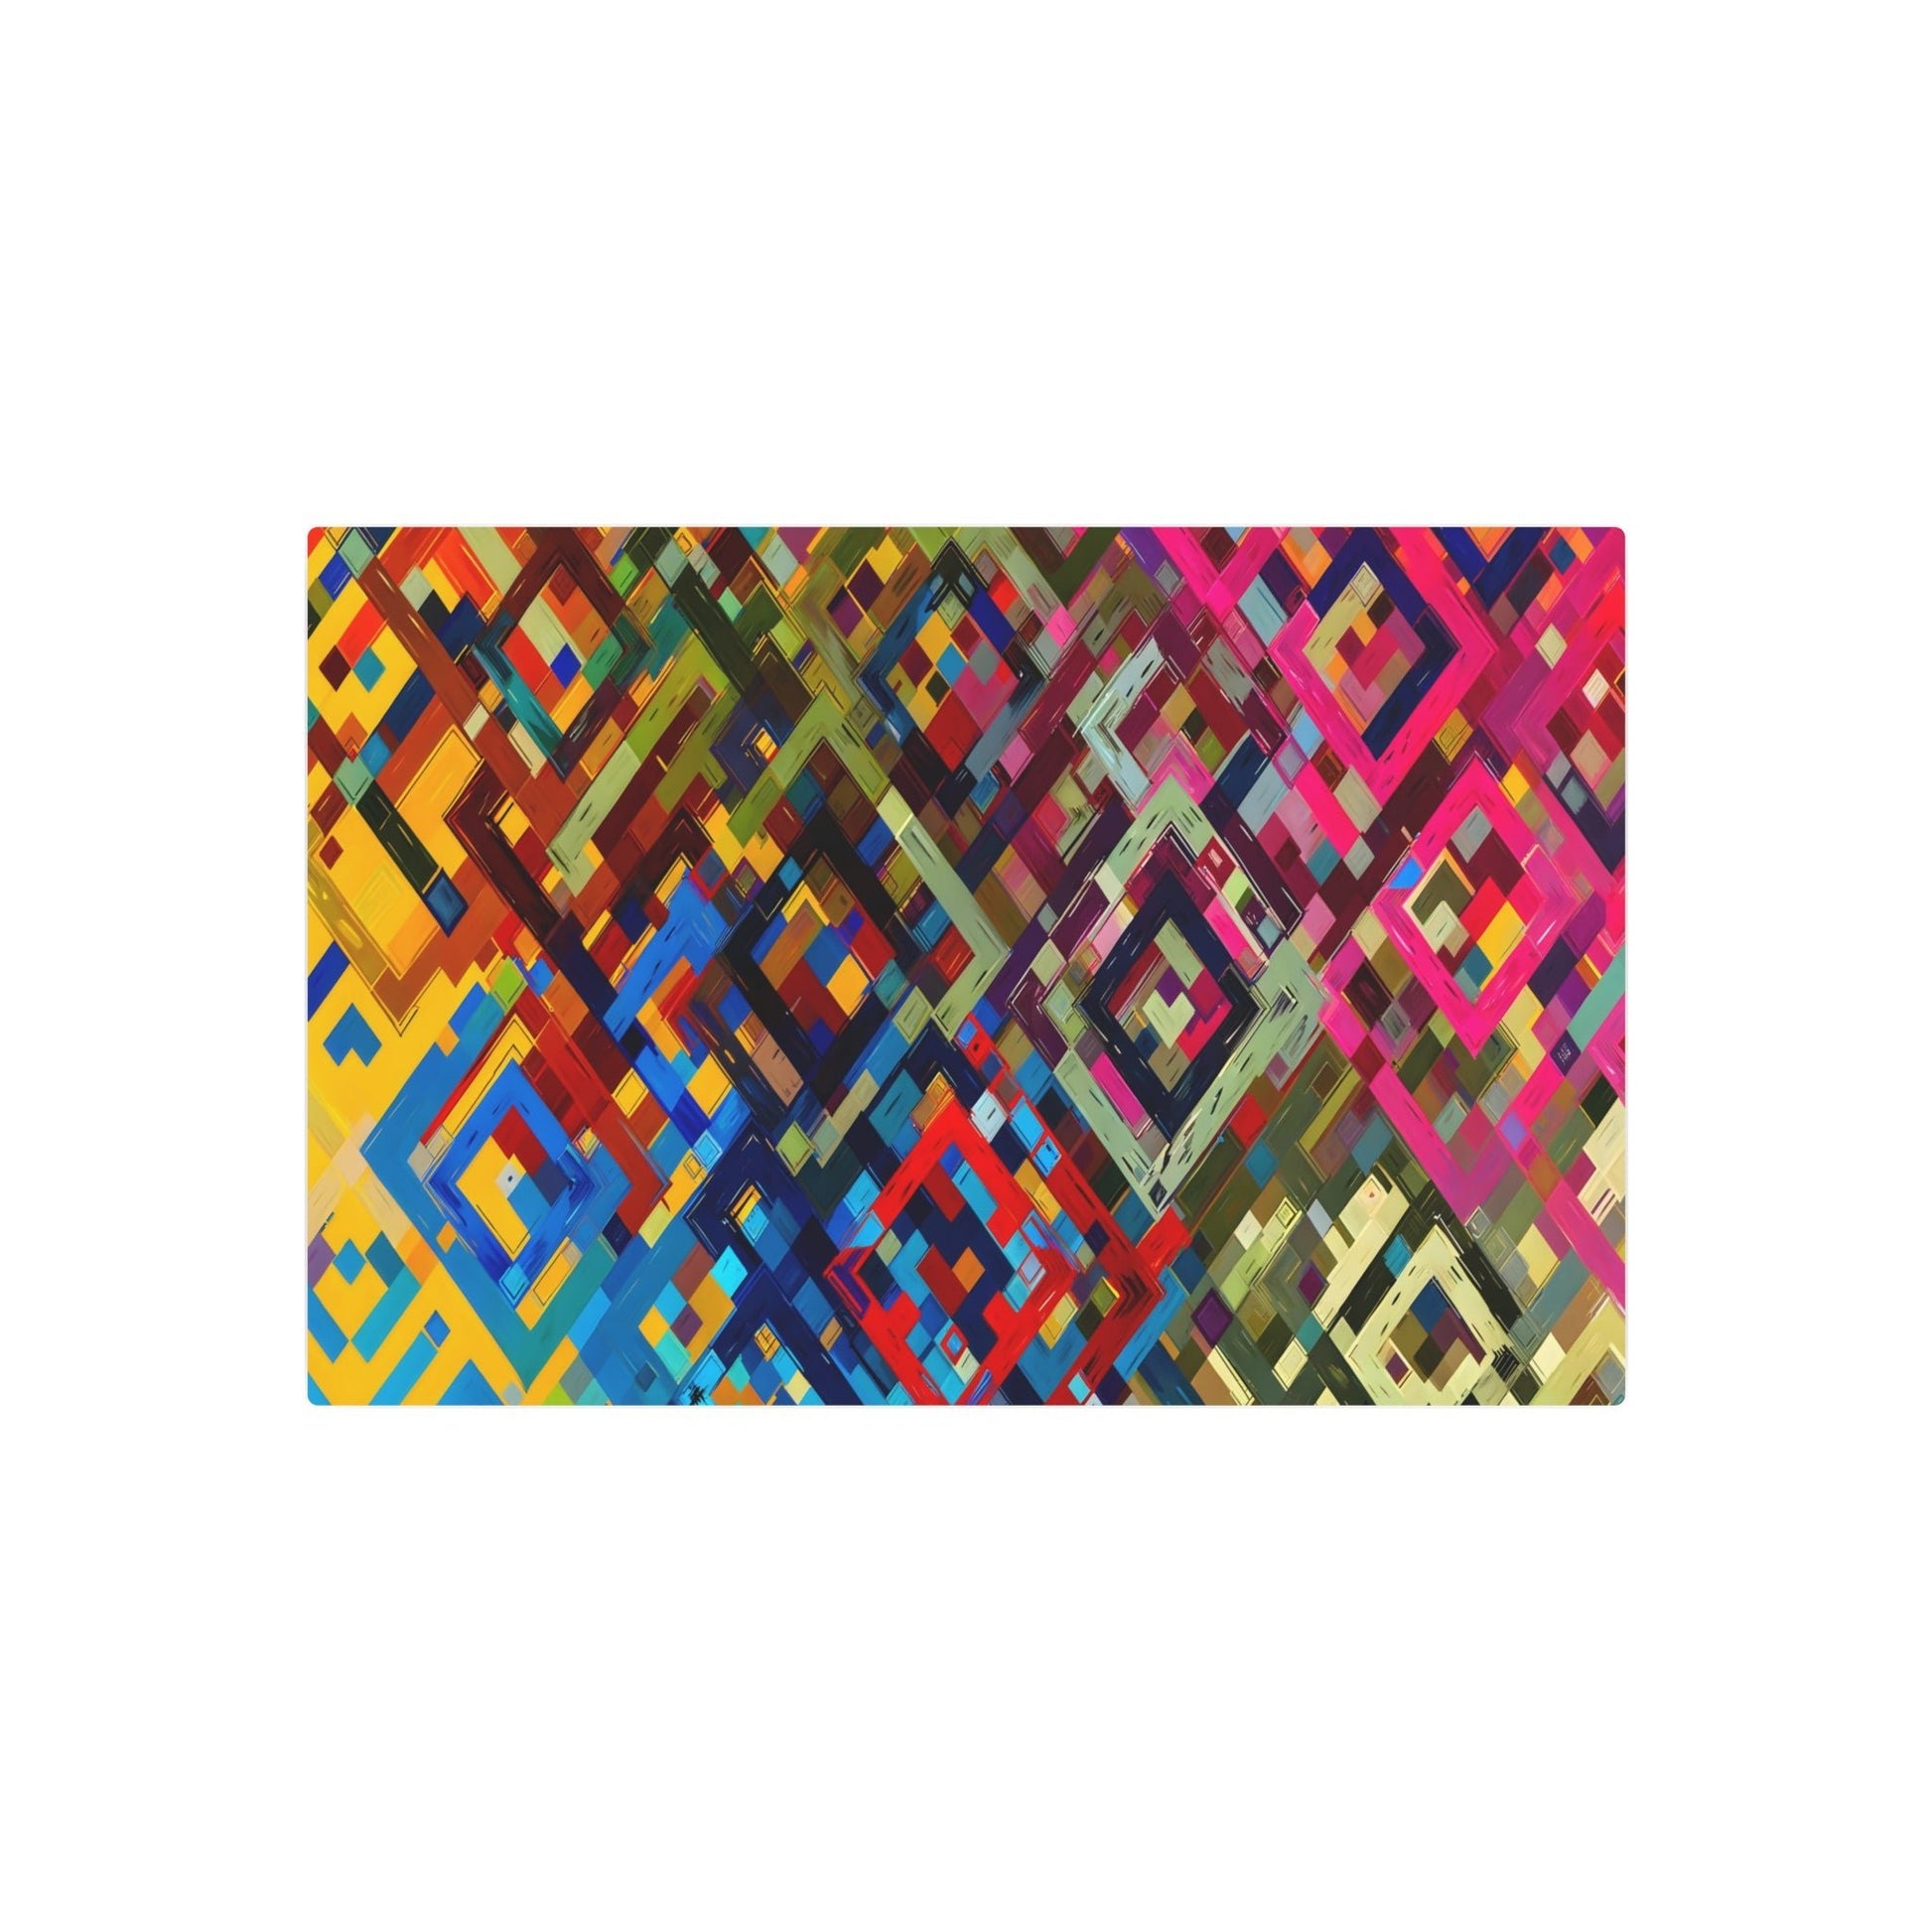 Metal Poster Art | "Vibrant Modern Digital Art - Geometric Shapes & Bold Colors in Contemporary Style Abstract Patterns" - Metal Poster Art 30″ x 20″ (Horizontal) 0.12''